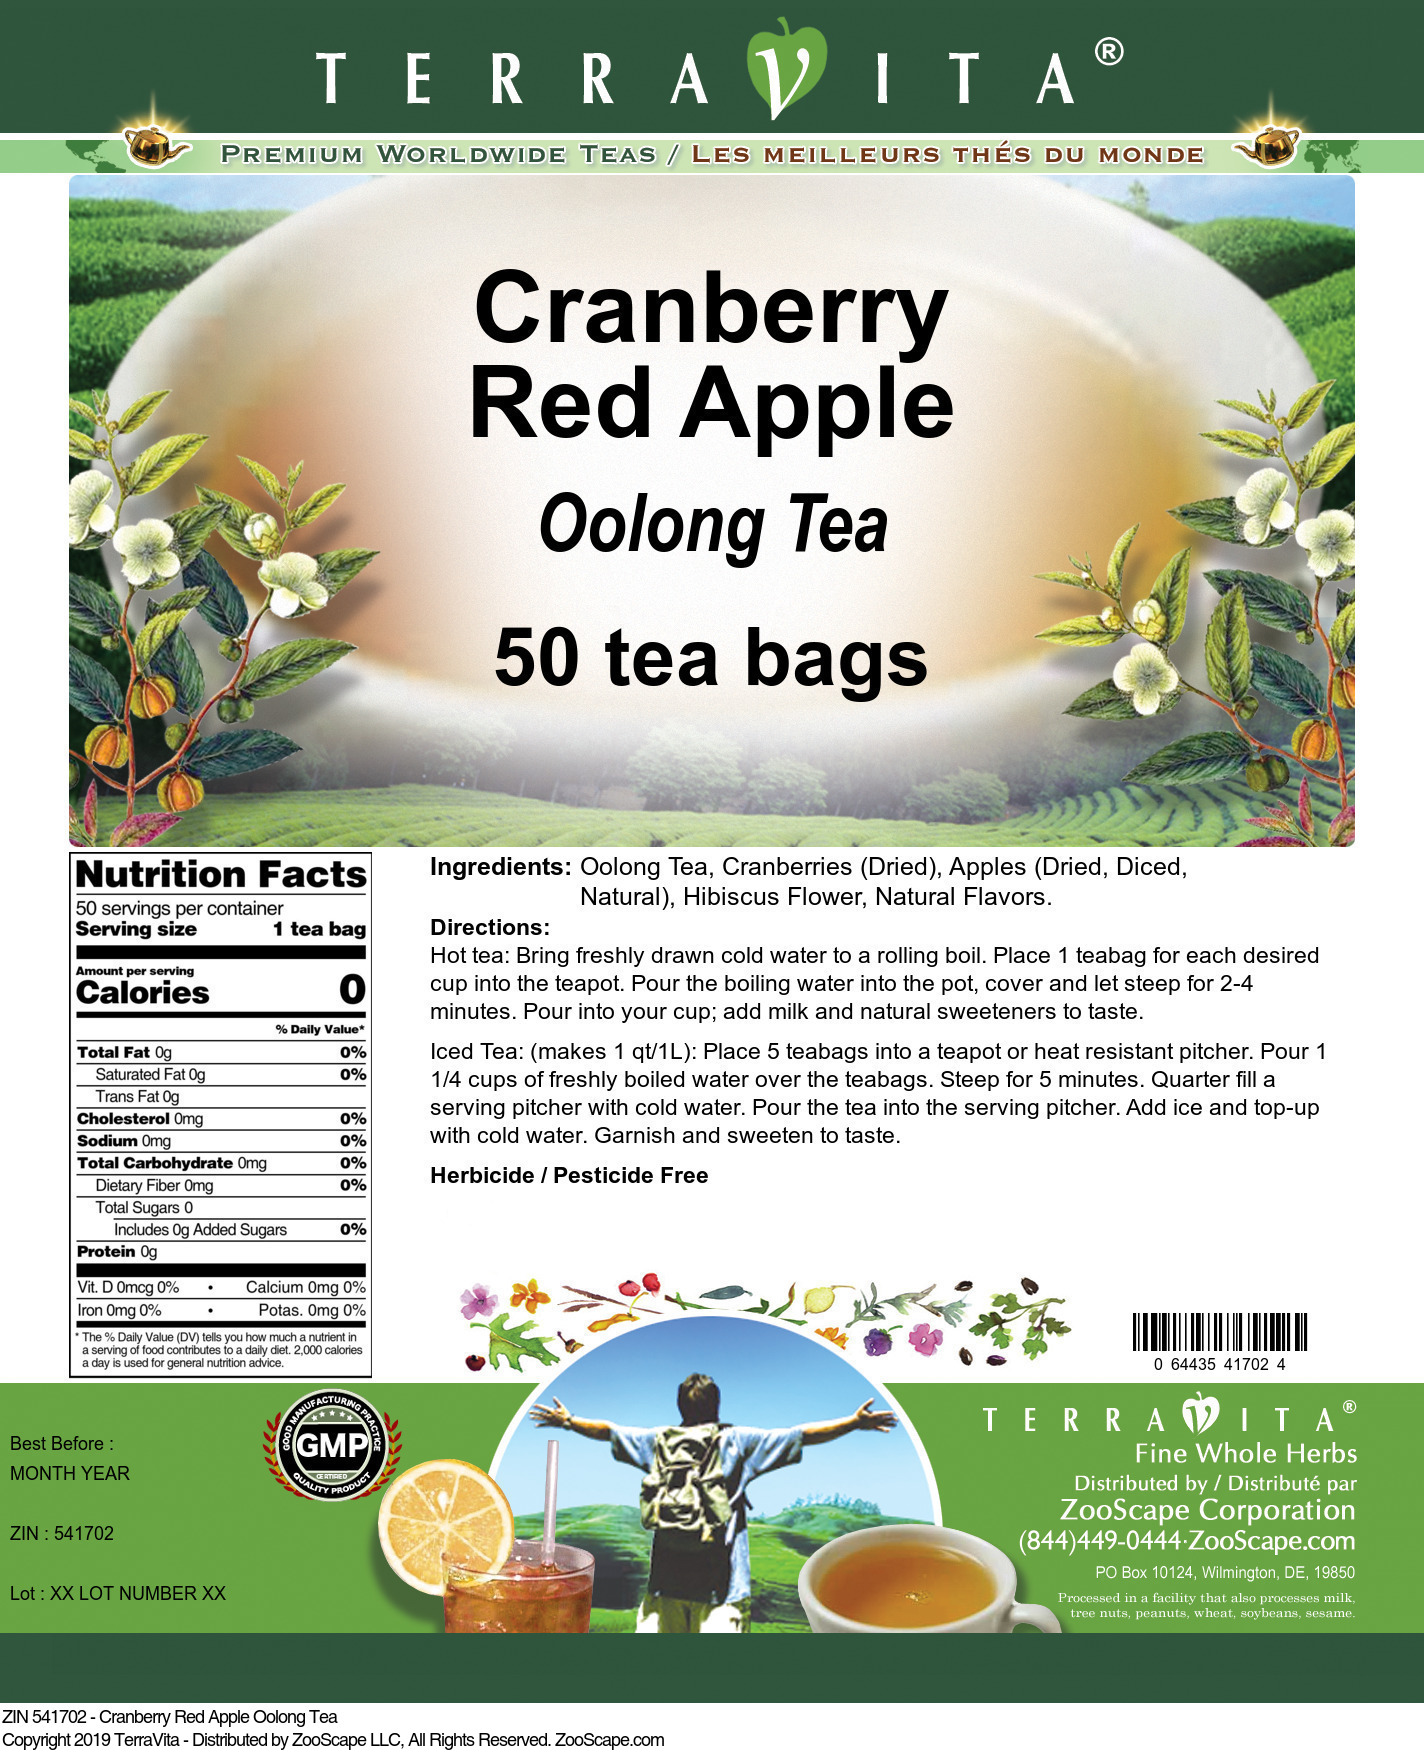 Cranberry Red Apple Oolong Tea - Label